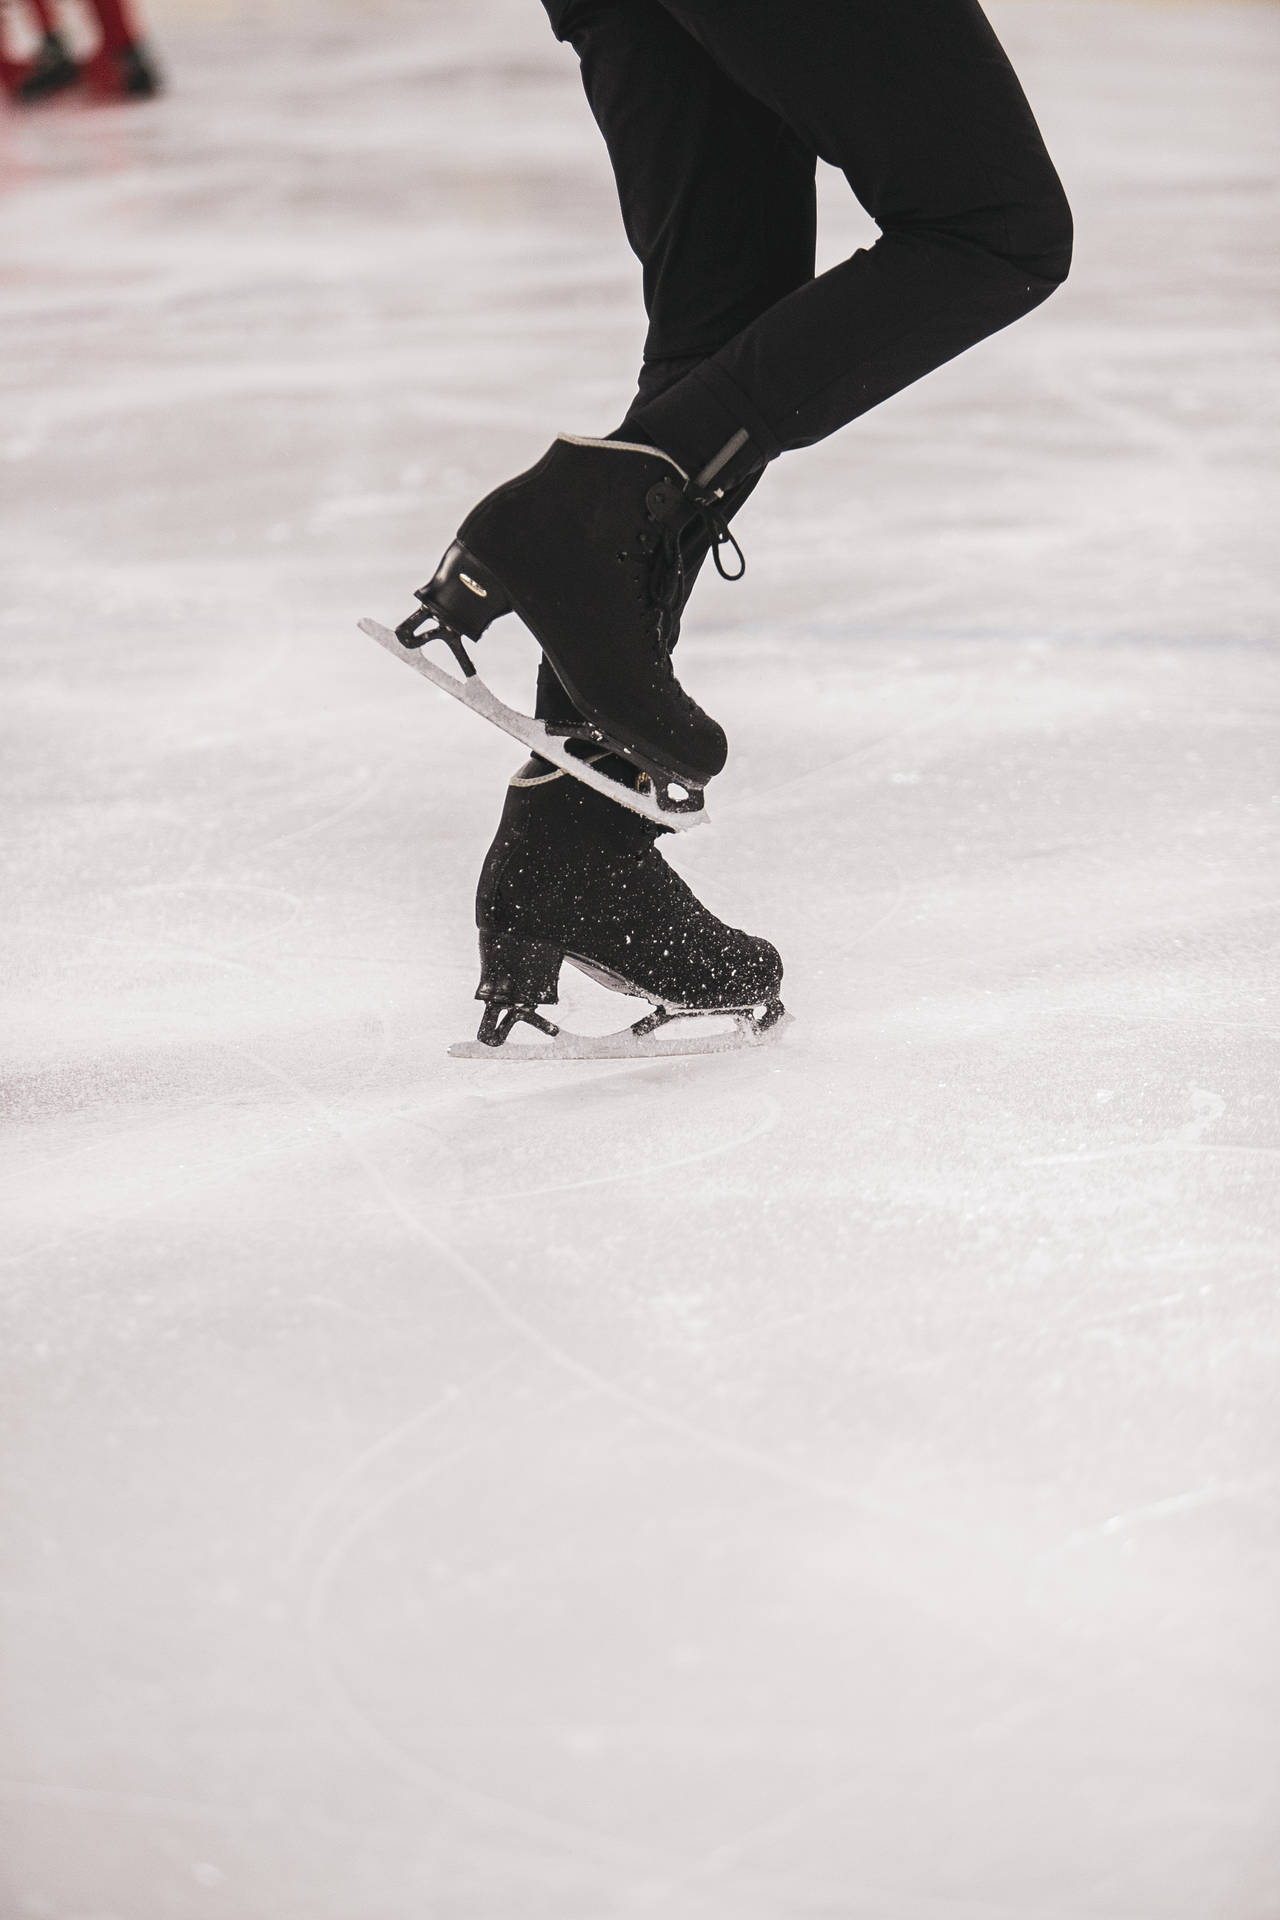 Aesthetic Black Ice Skating Boots Wallpaper